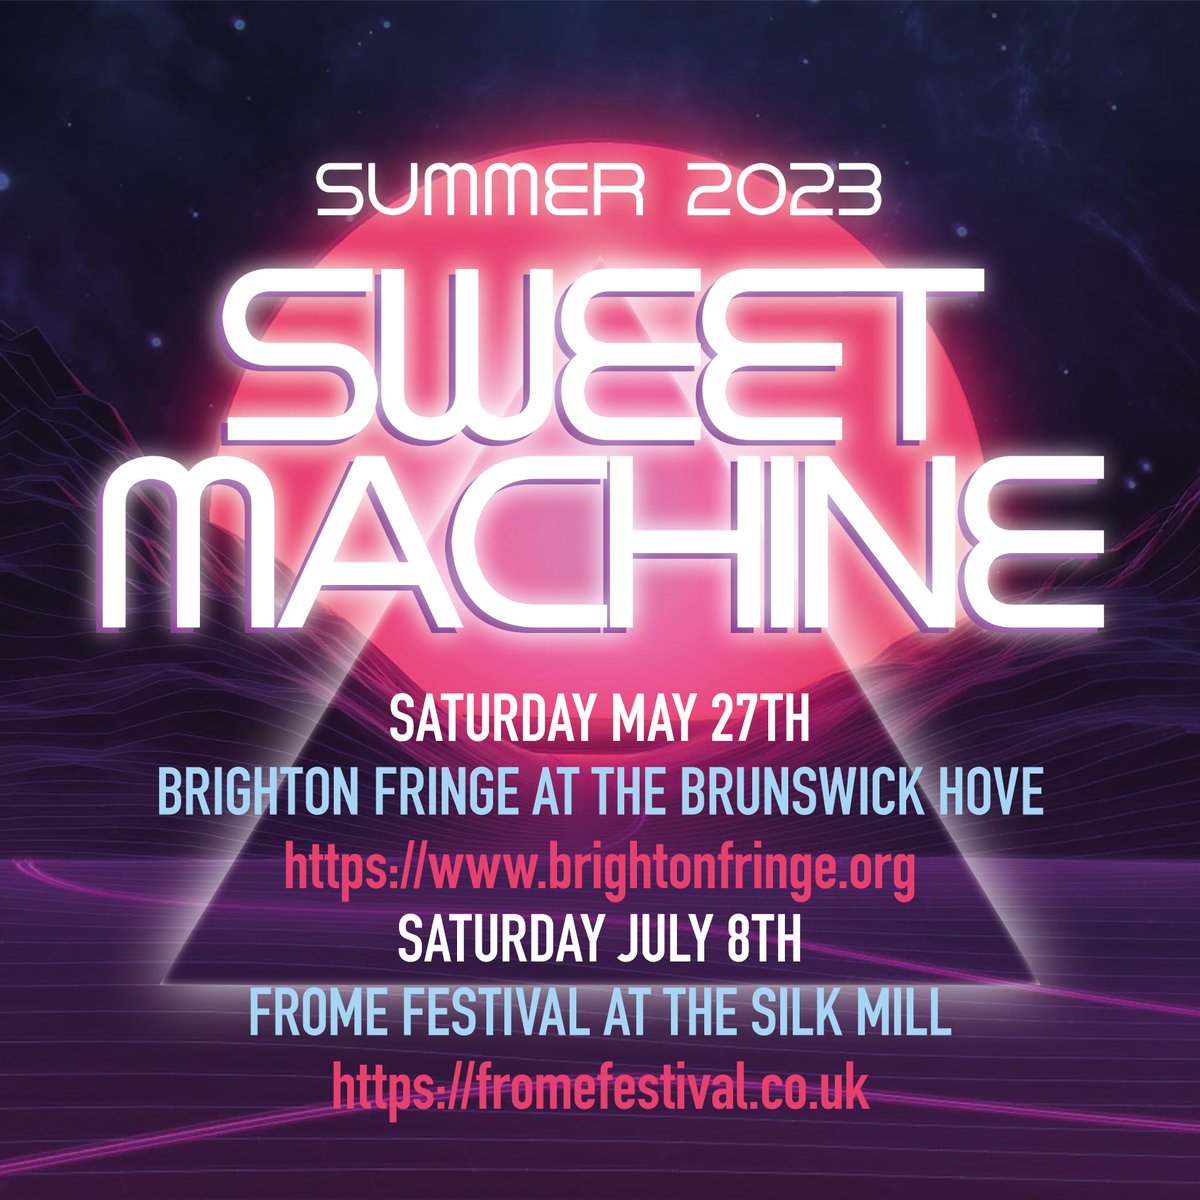 Look forward to seeing you this summer for a couple of great #festival events! First up is May 27th @brightonfringe @Brunswickpub with @infravioletuk and then July 8th @SilkMillStudios for @Frome_Festival Contact @RavesGrave for info! #synthpop #livemusic #synthwave #electropop